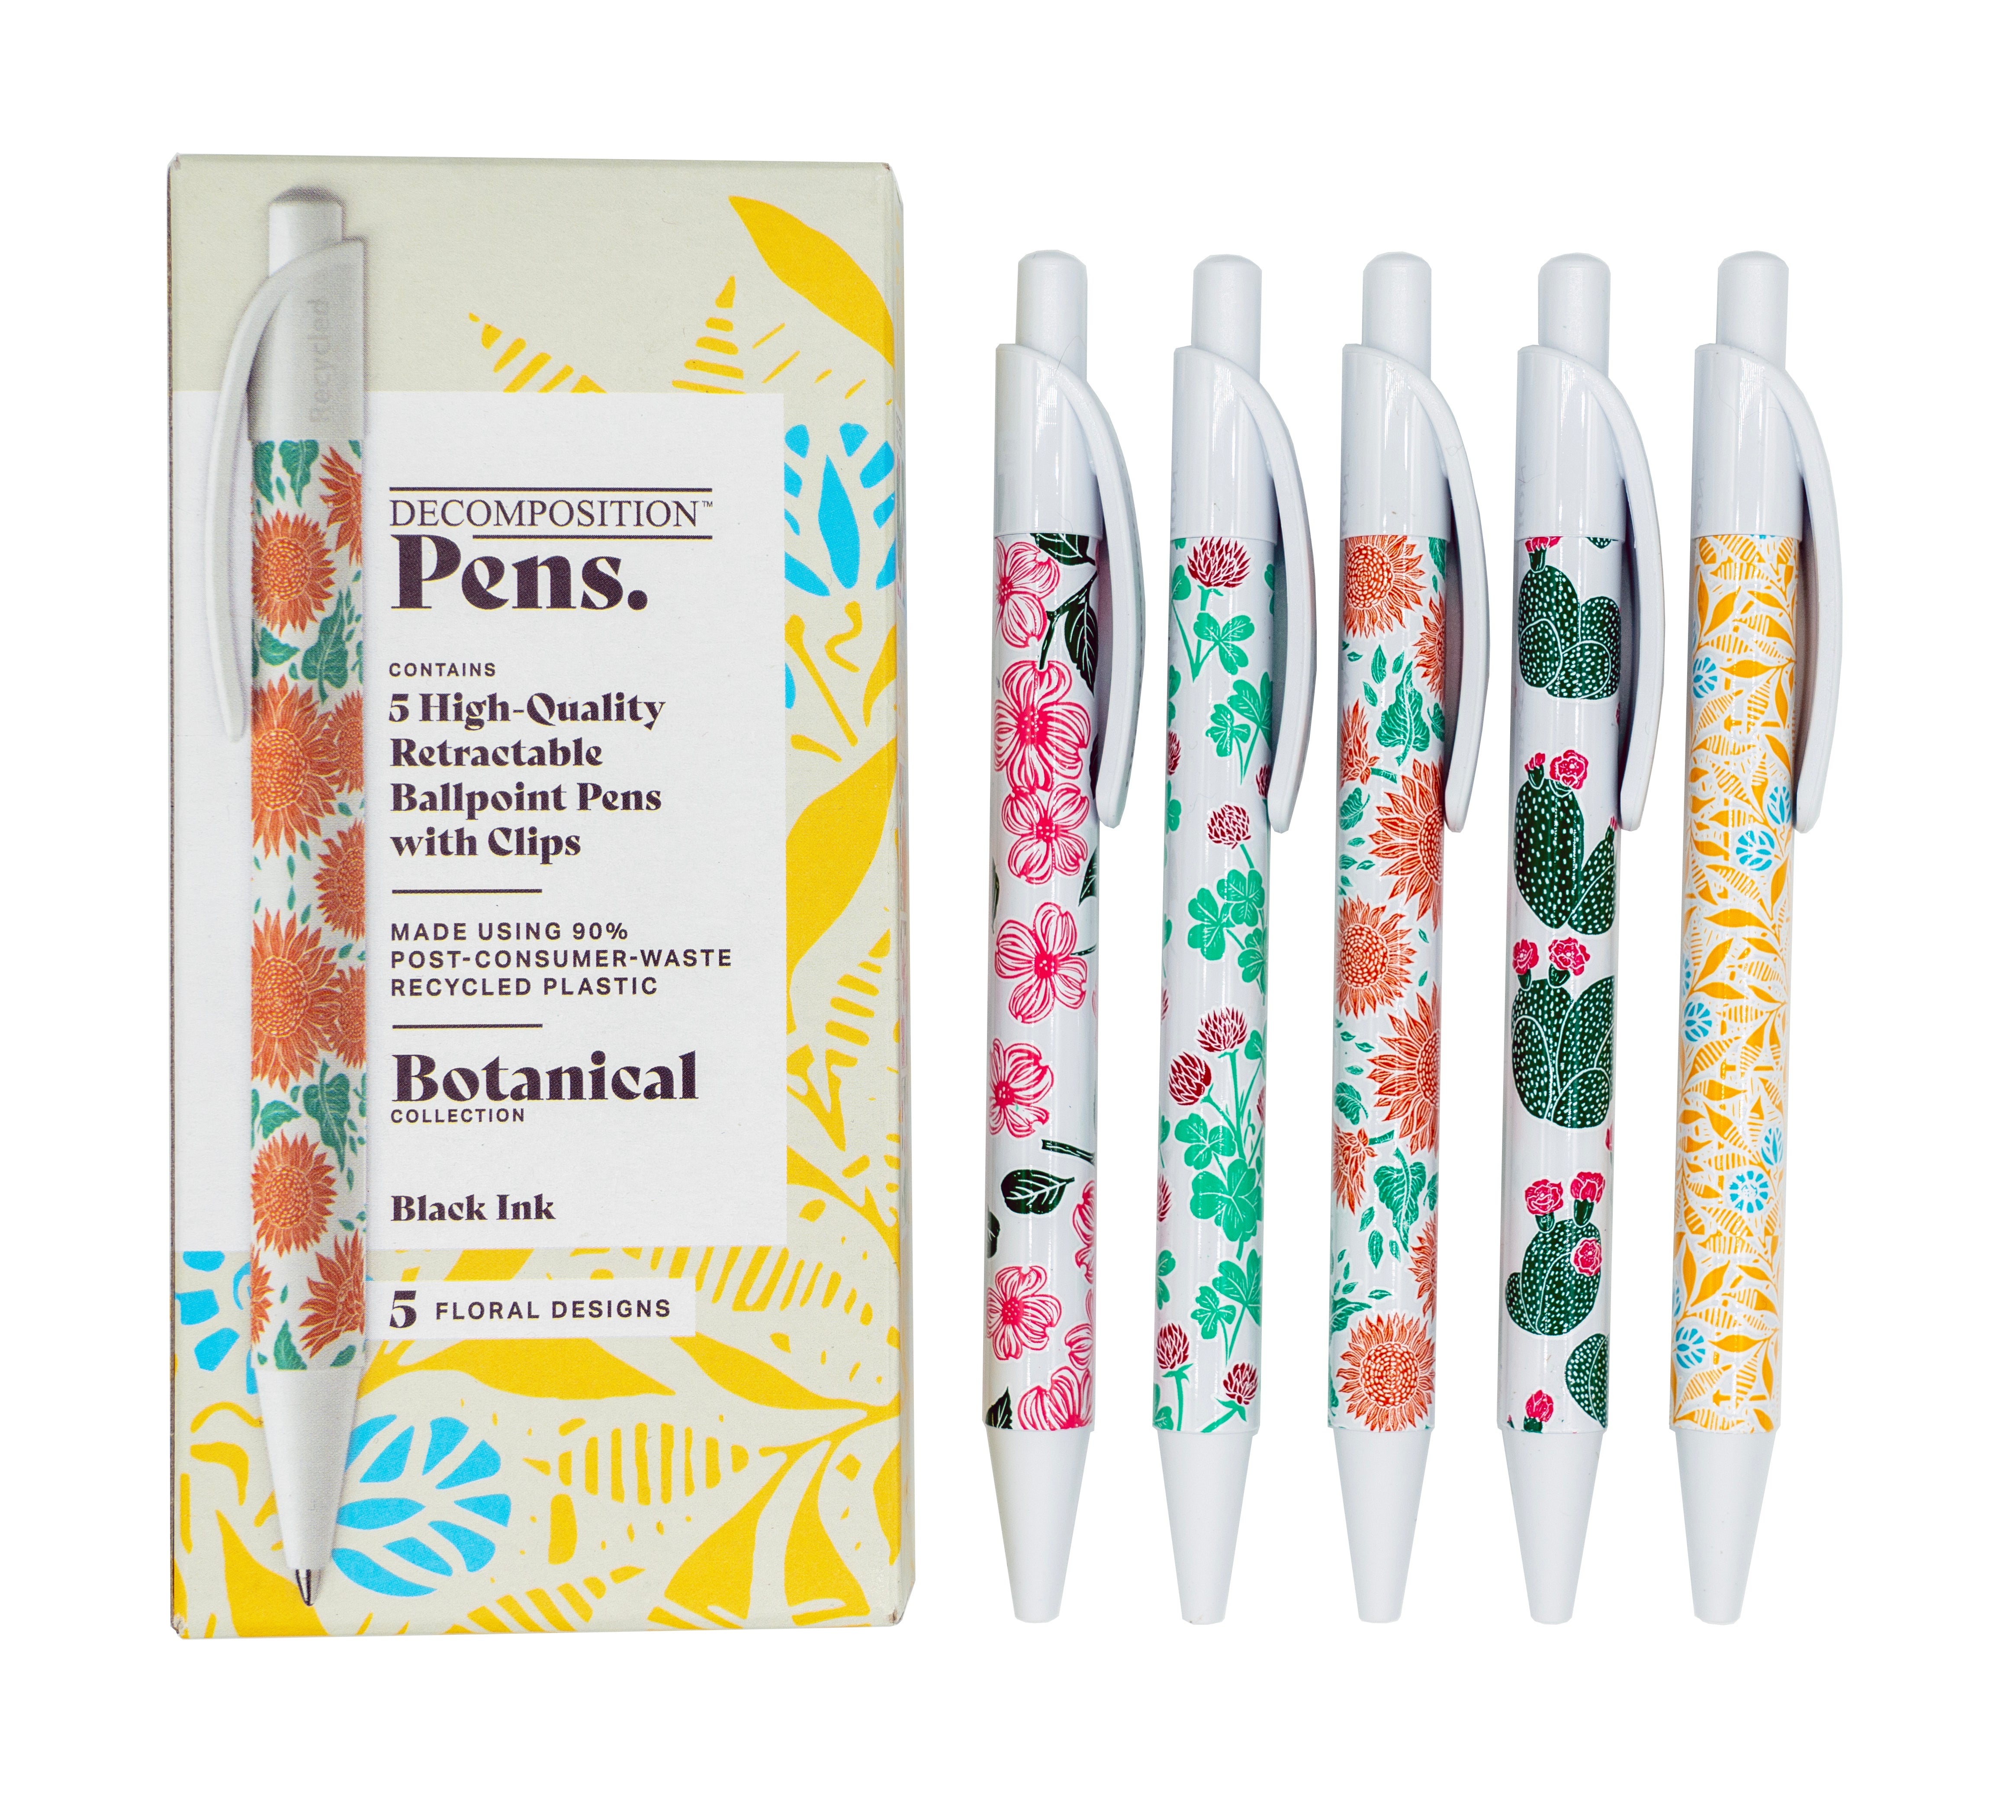 Box of five ballpoint pens with floral printed barrels